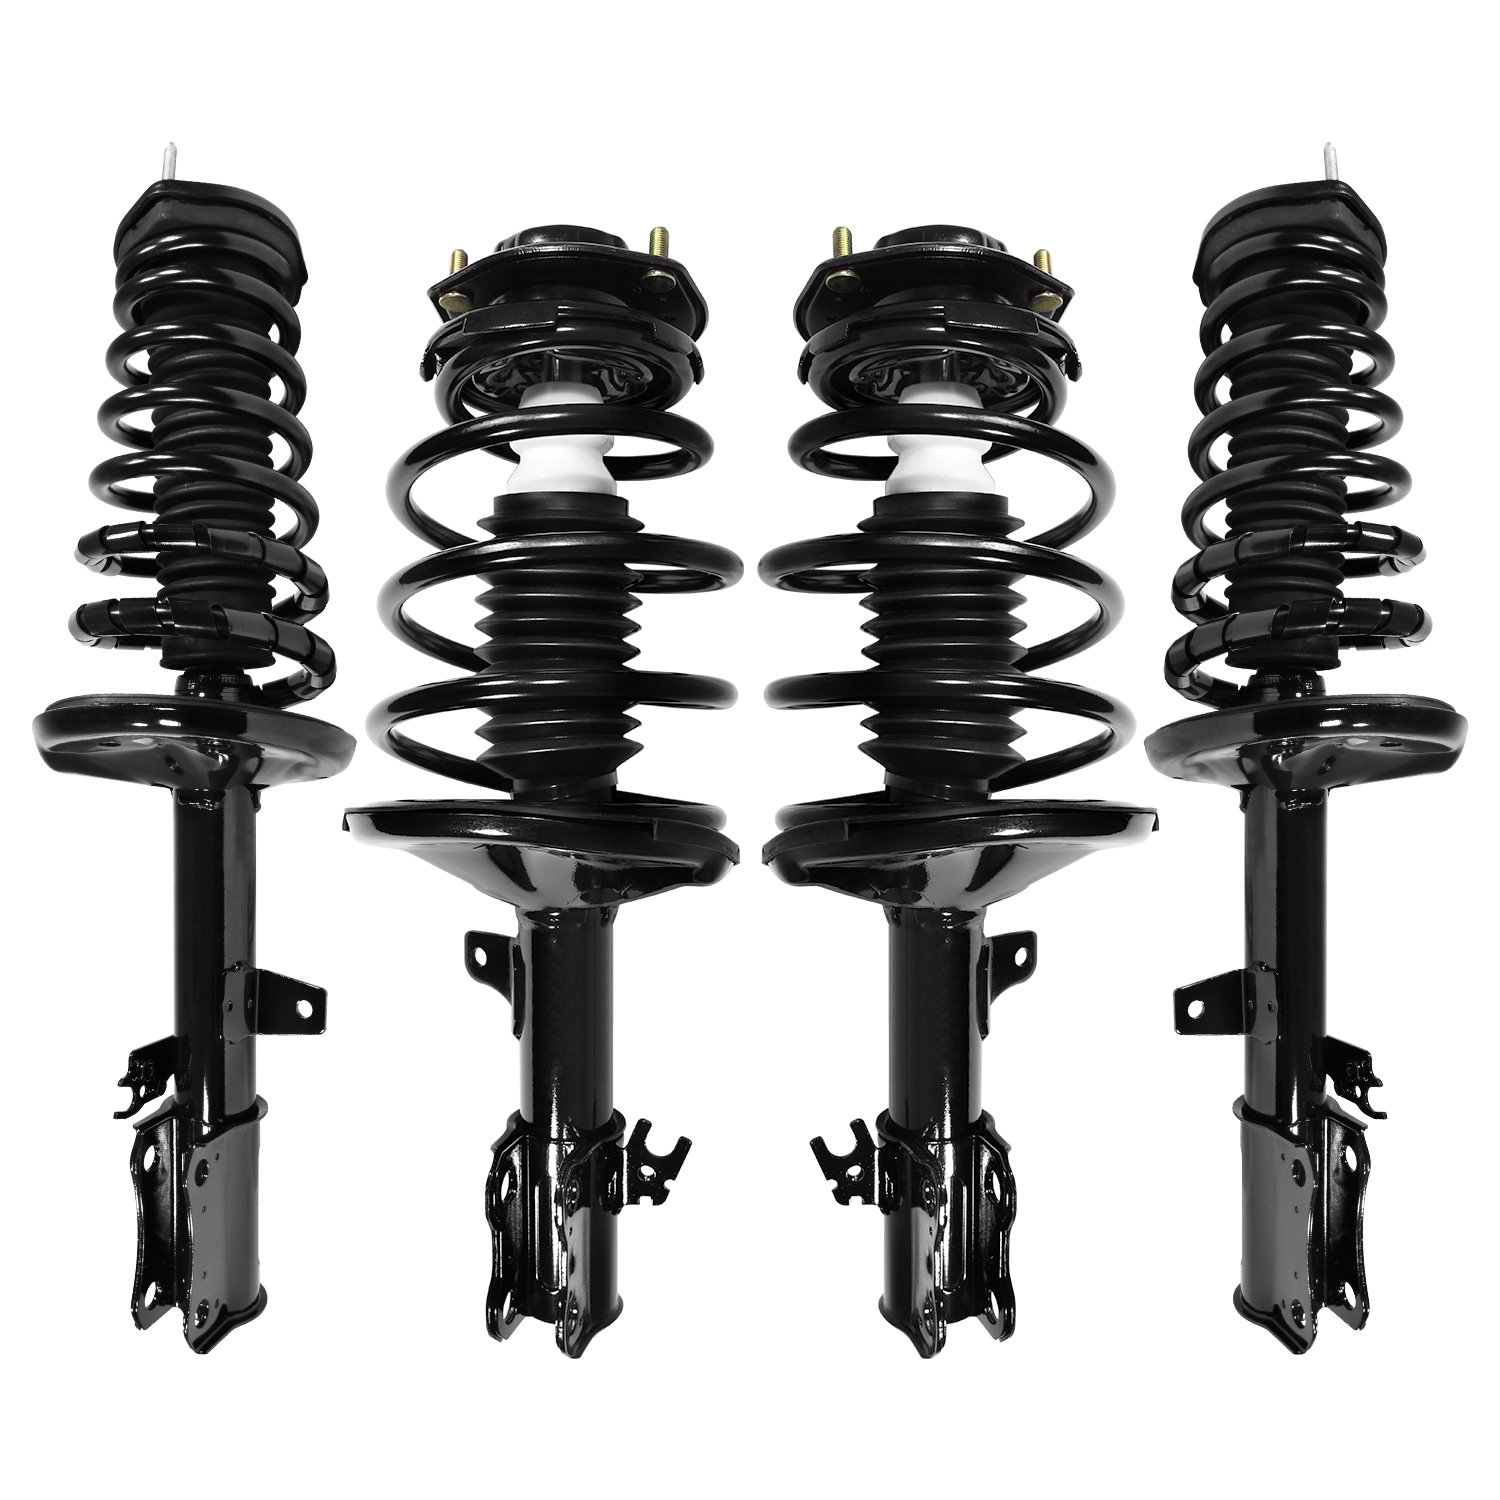 4-11181-15031-001 Front & Rear Suspension Strut & Coil Spring Assembly Kit Fits Select Toyota Camry, Toyota Solara